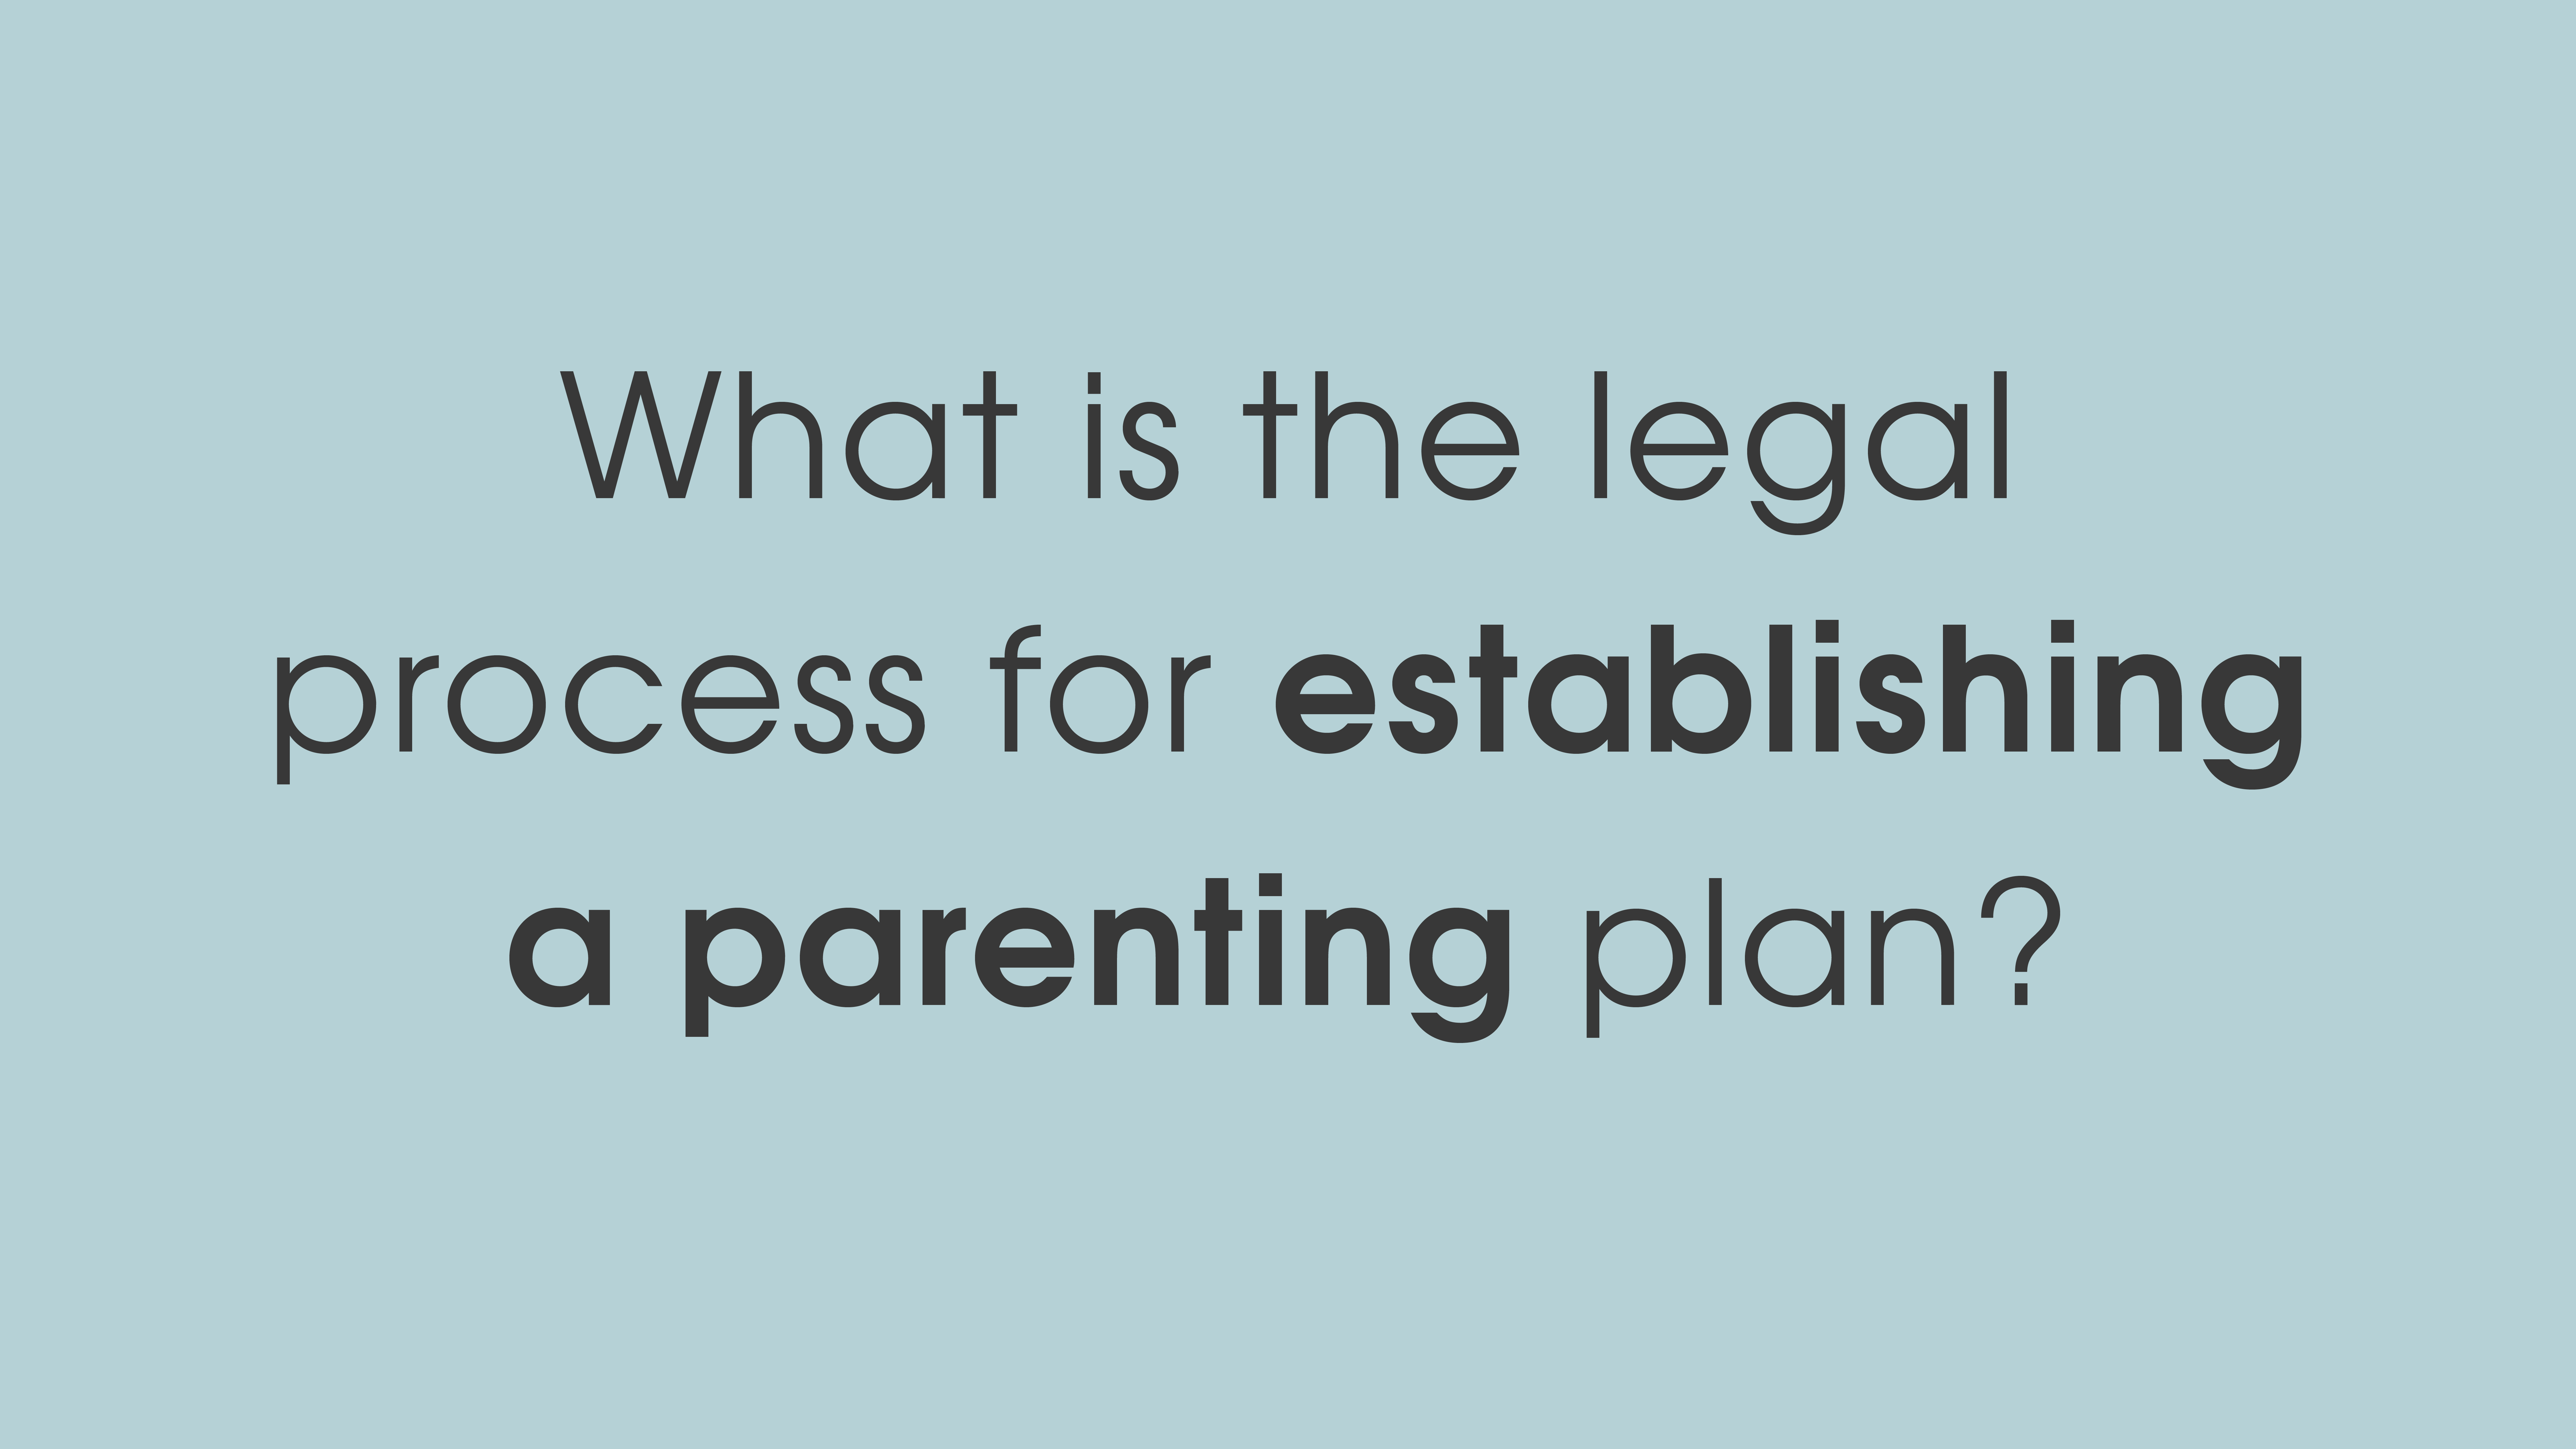 What is the legal process for establishing a parenting plan